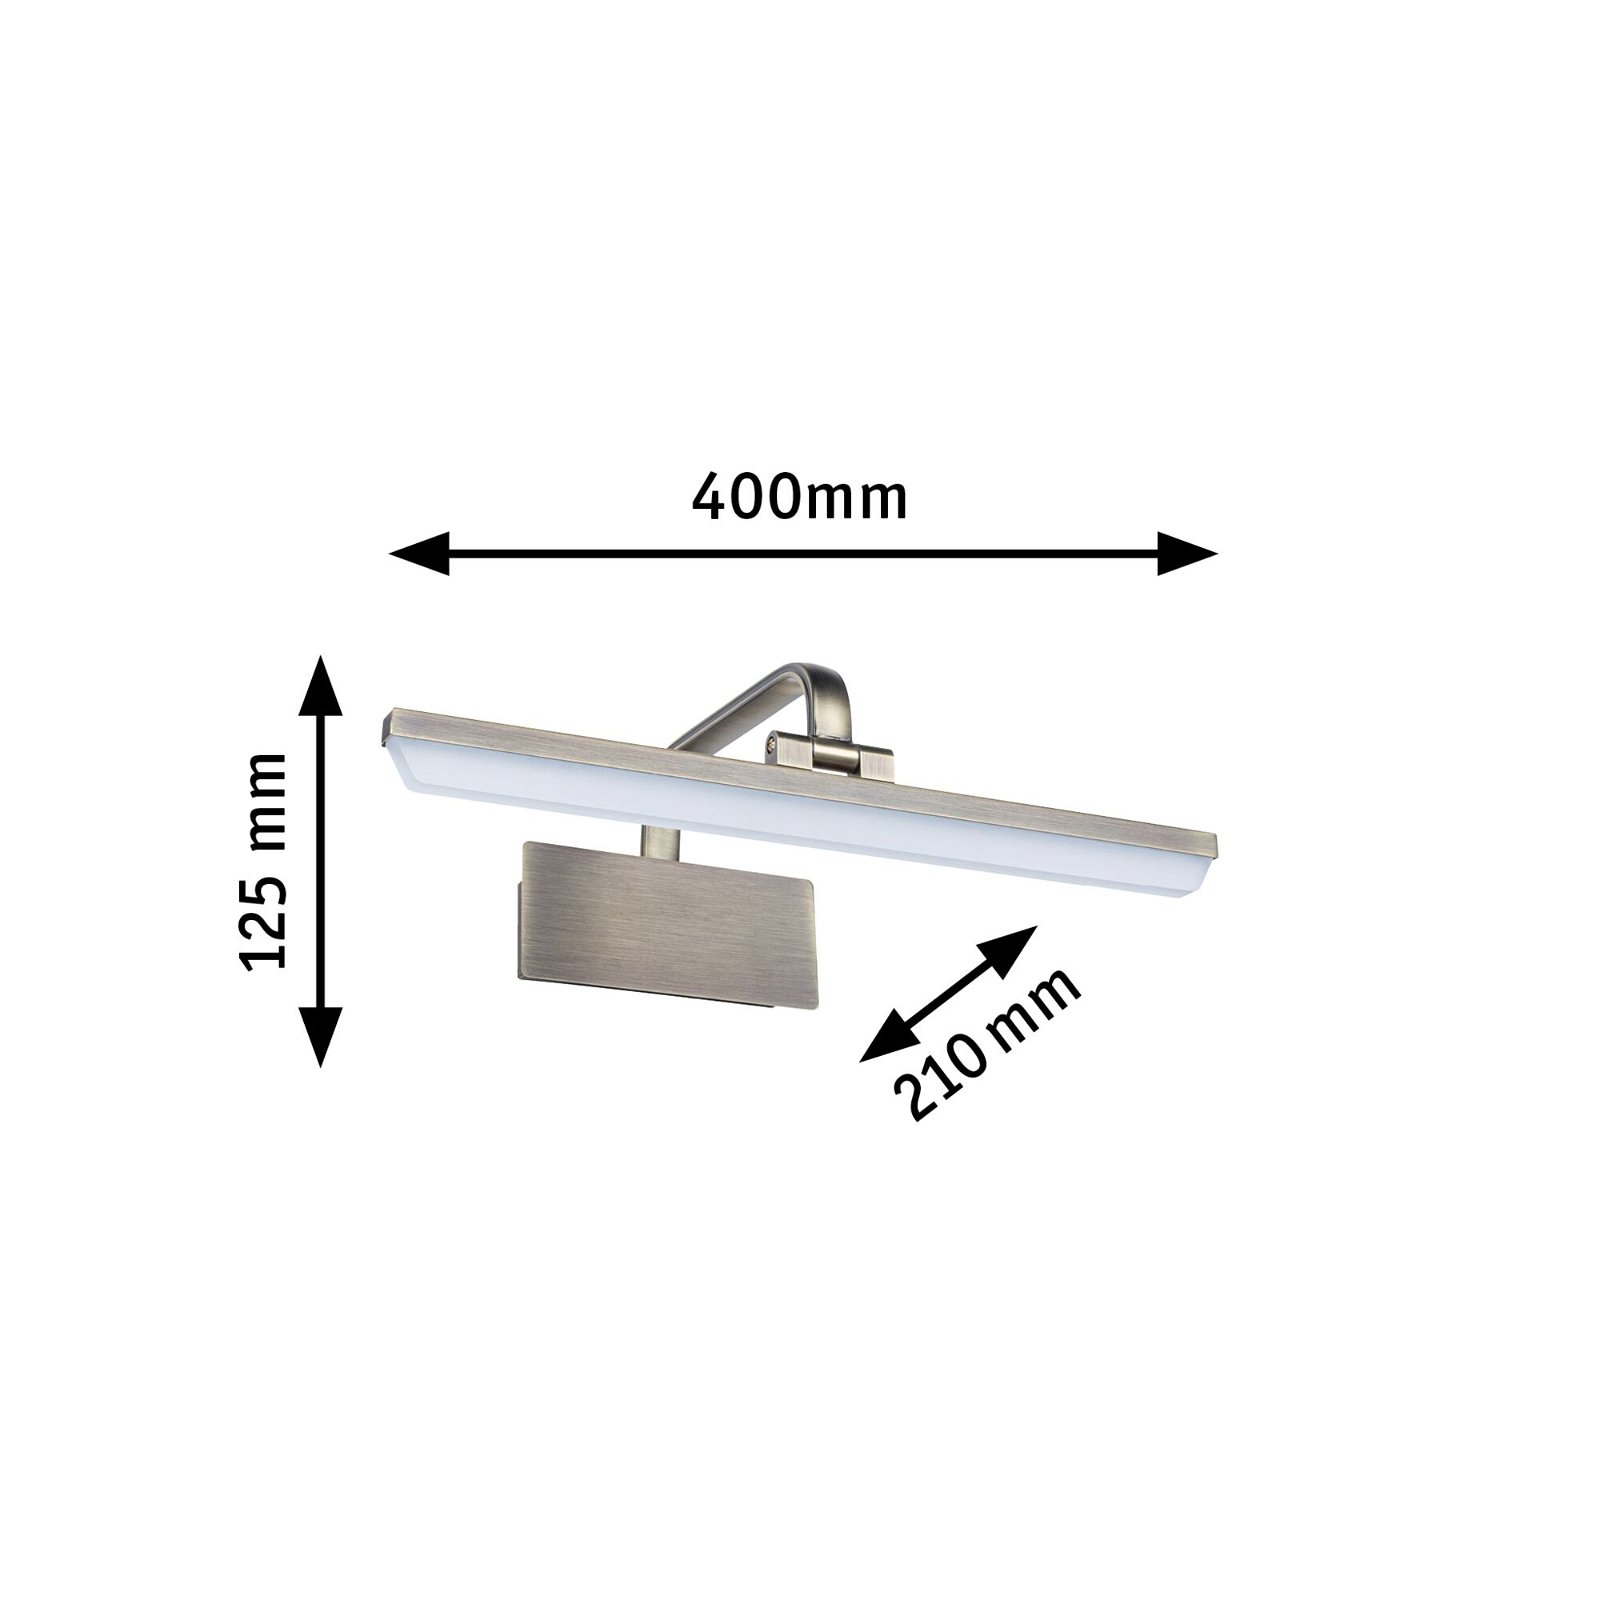 LED Picture luminaire Renan 3000K 600lm 230V 9,5W Old brass